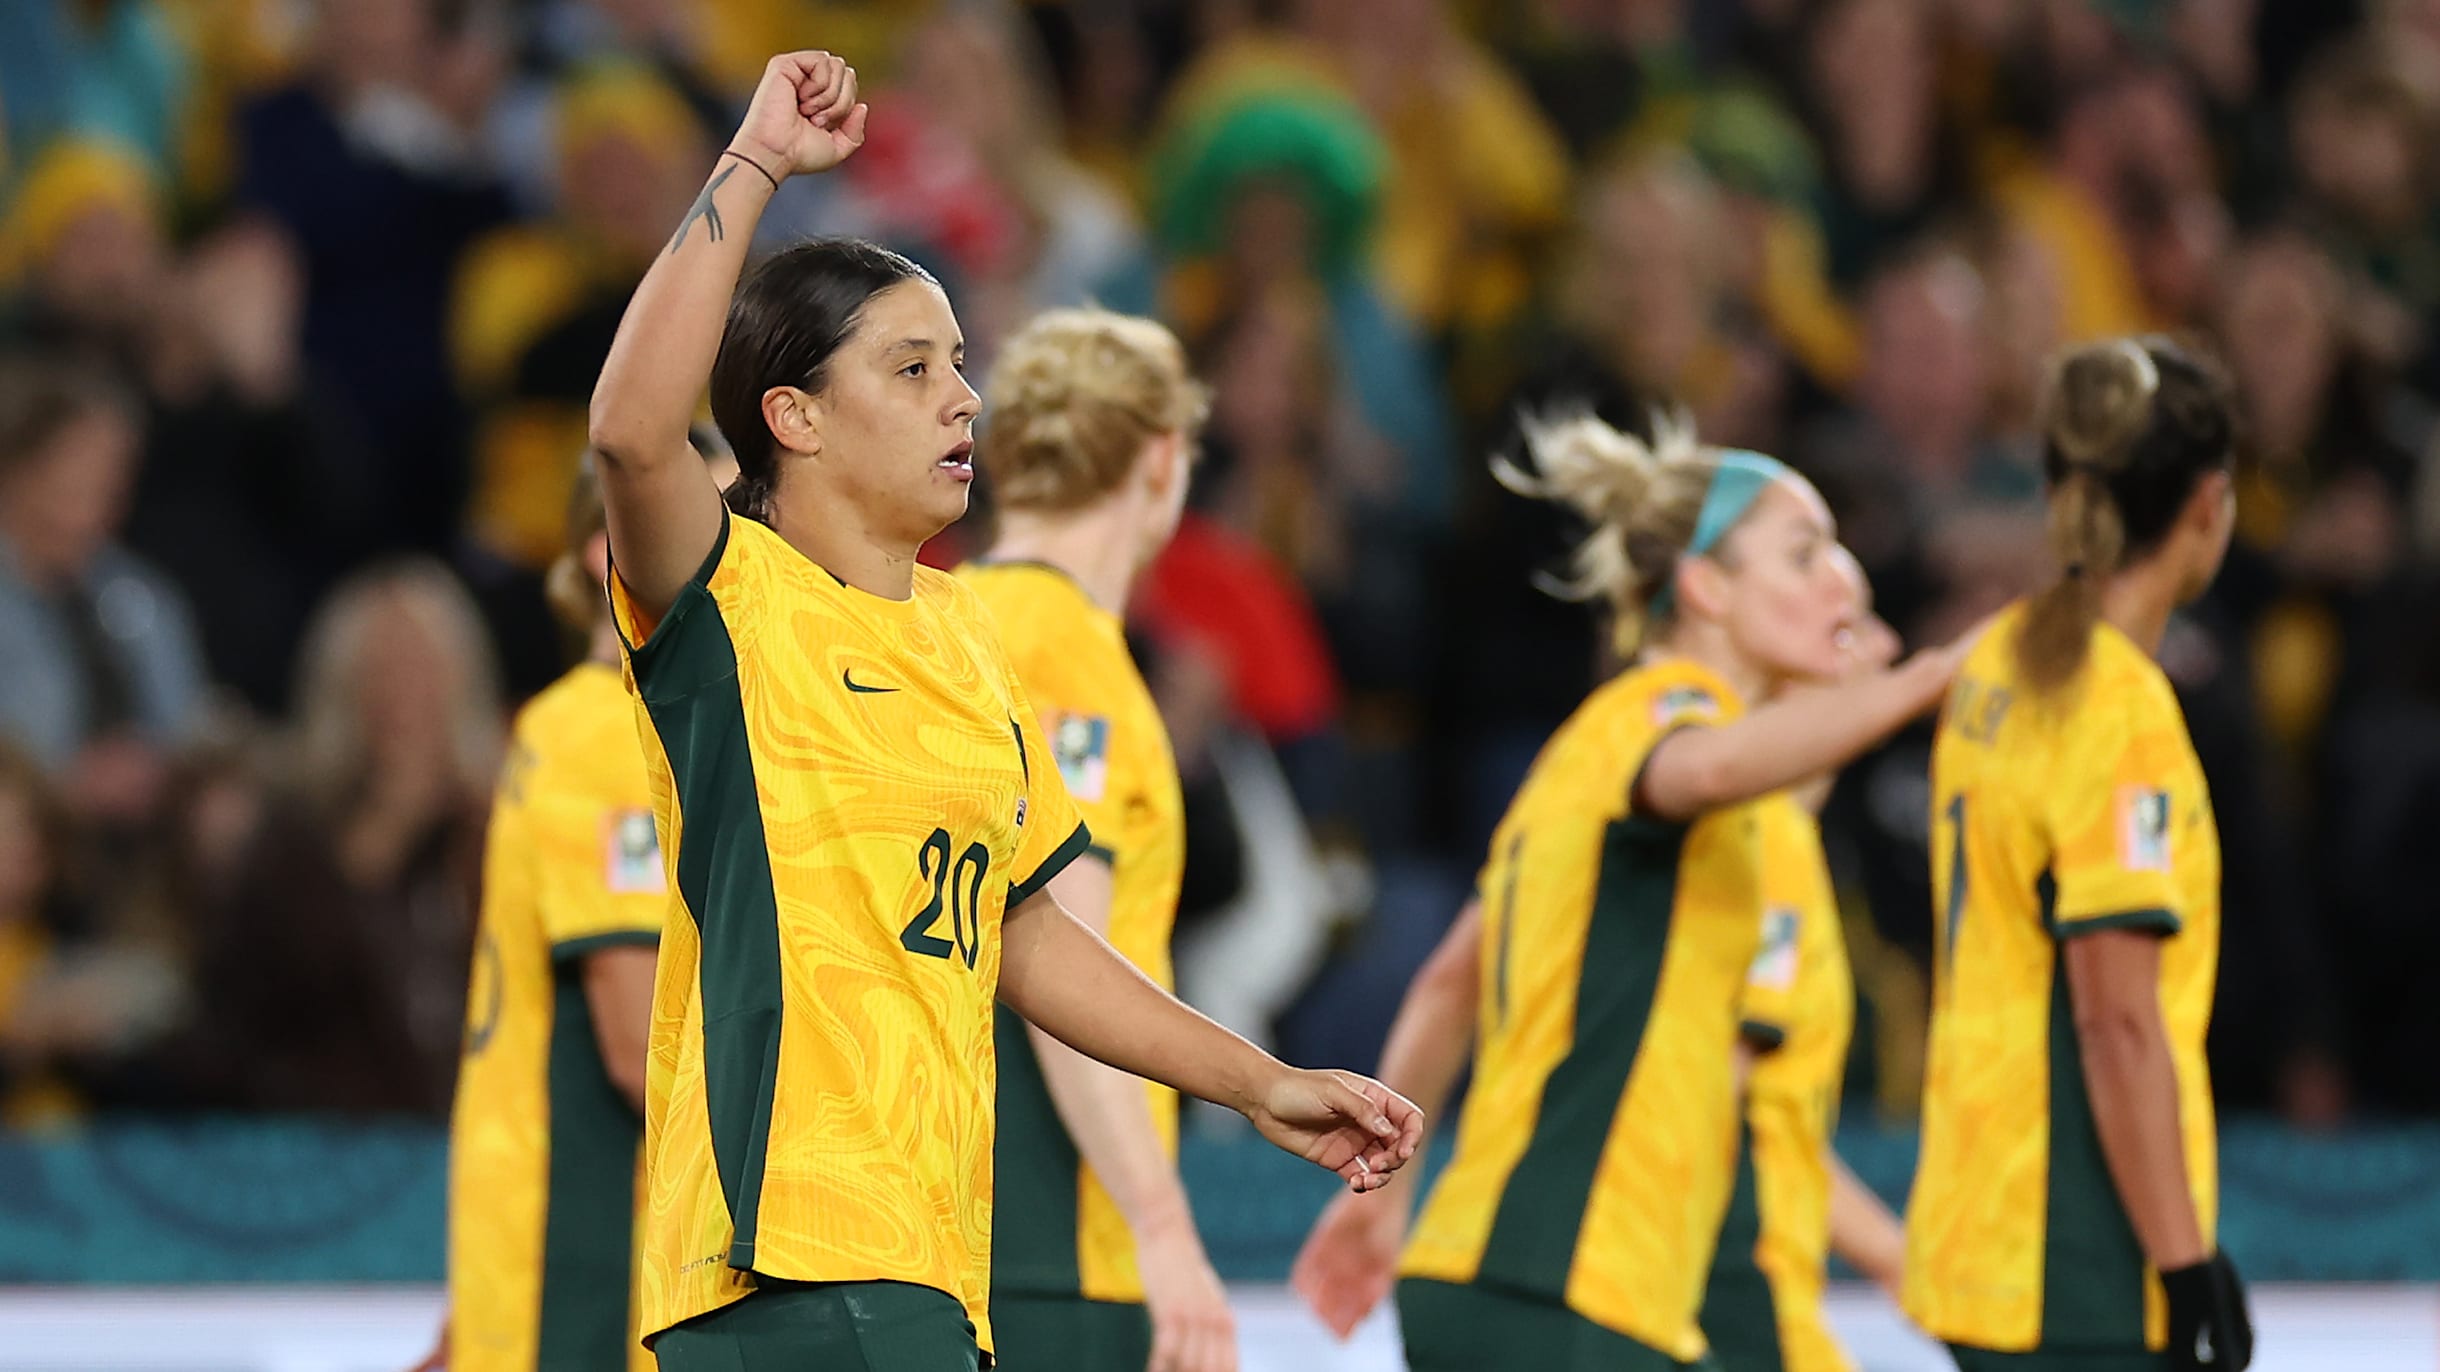 Perth games confirmed for 2023 FIFA Women's World Cup